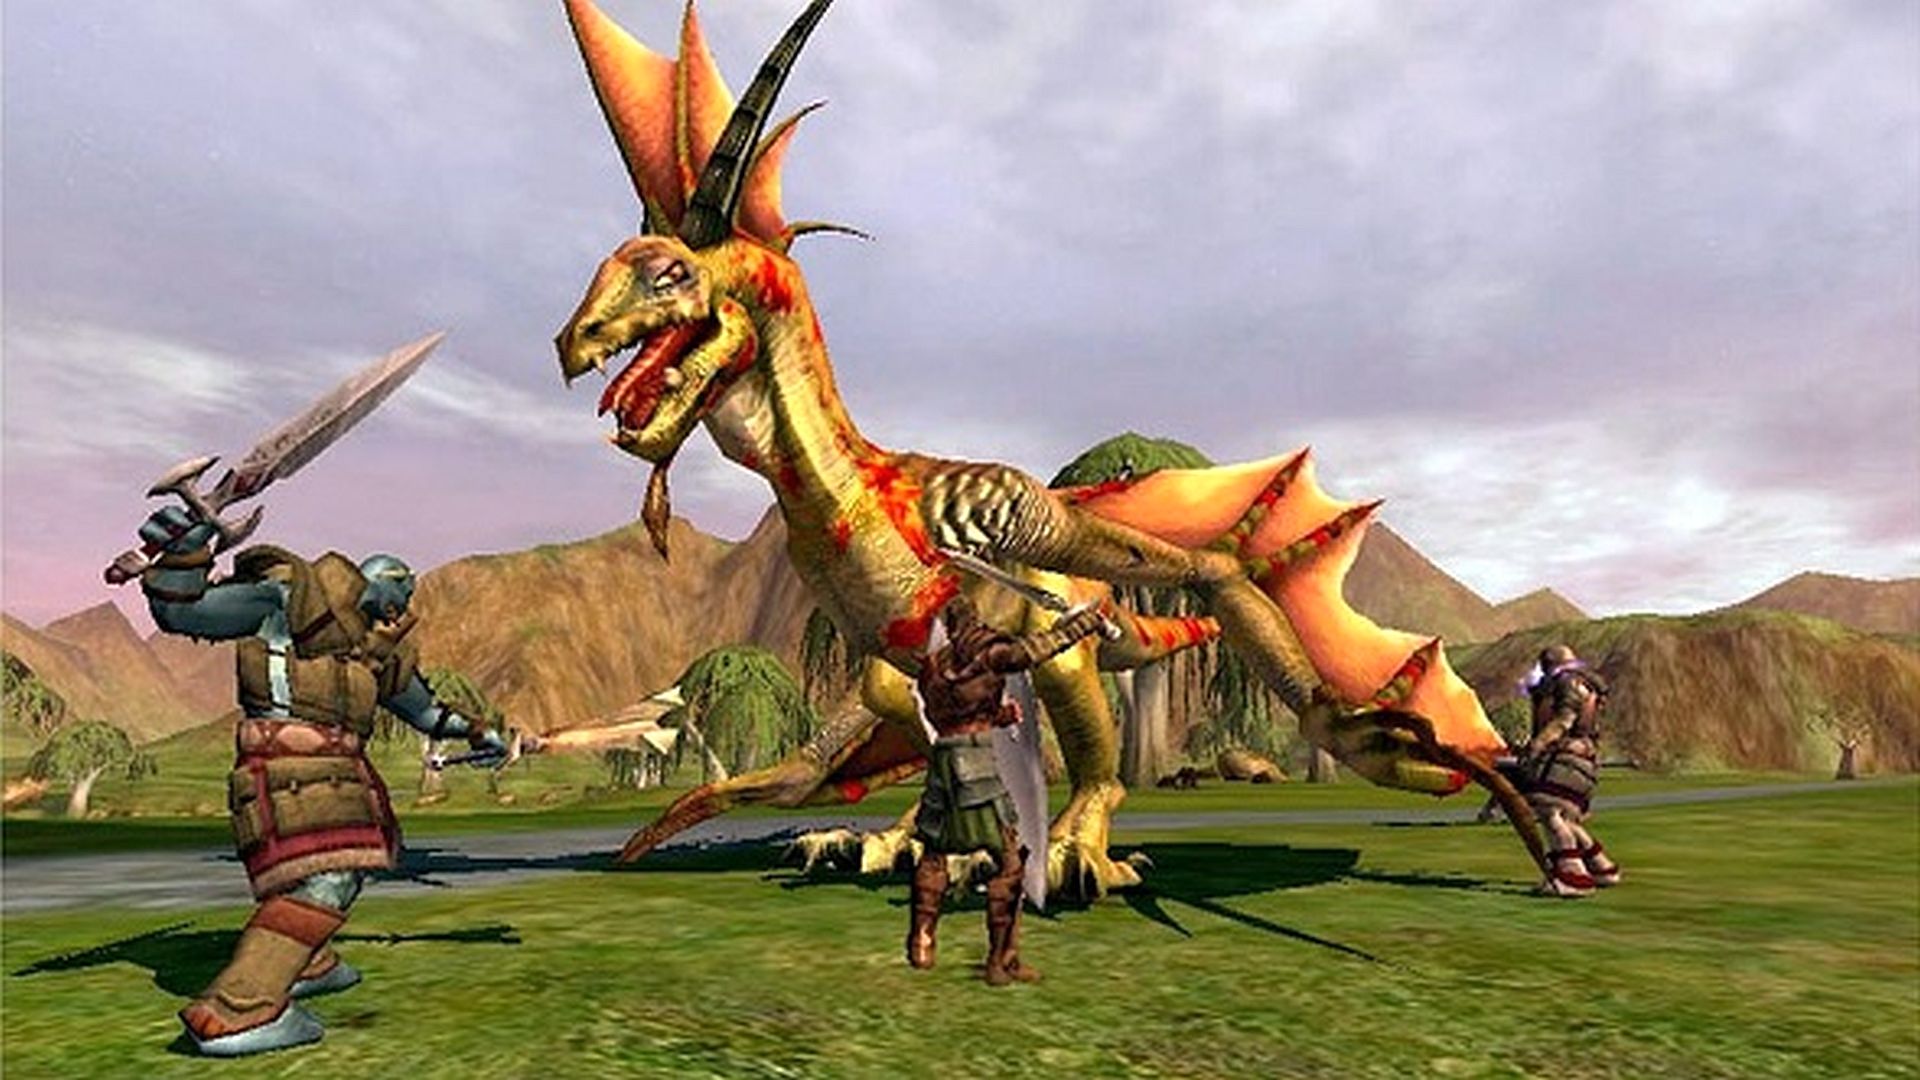 It's been over a decade since it was shut down, but no MMO